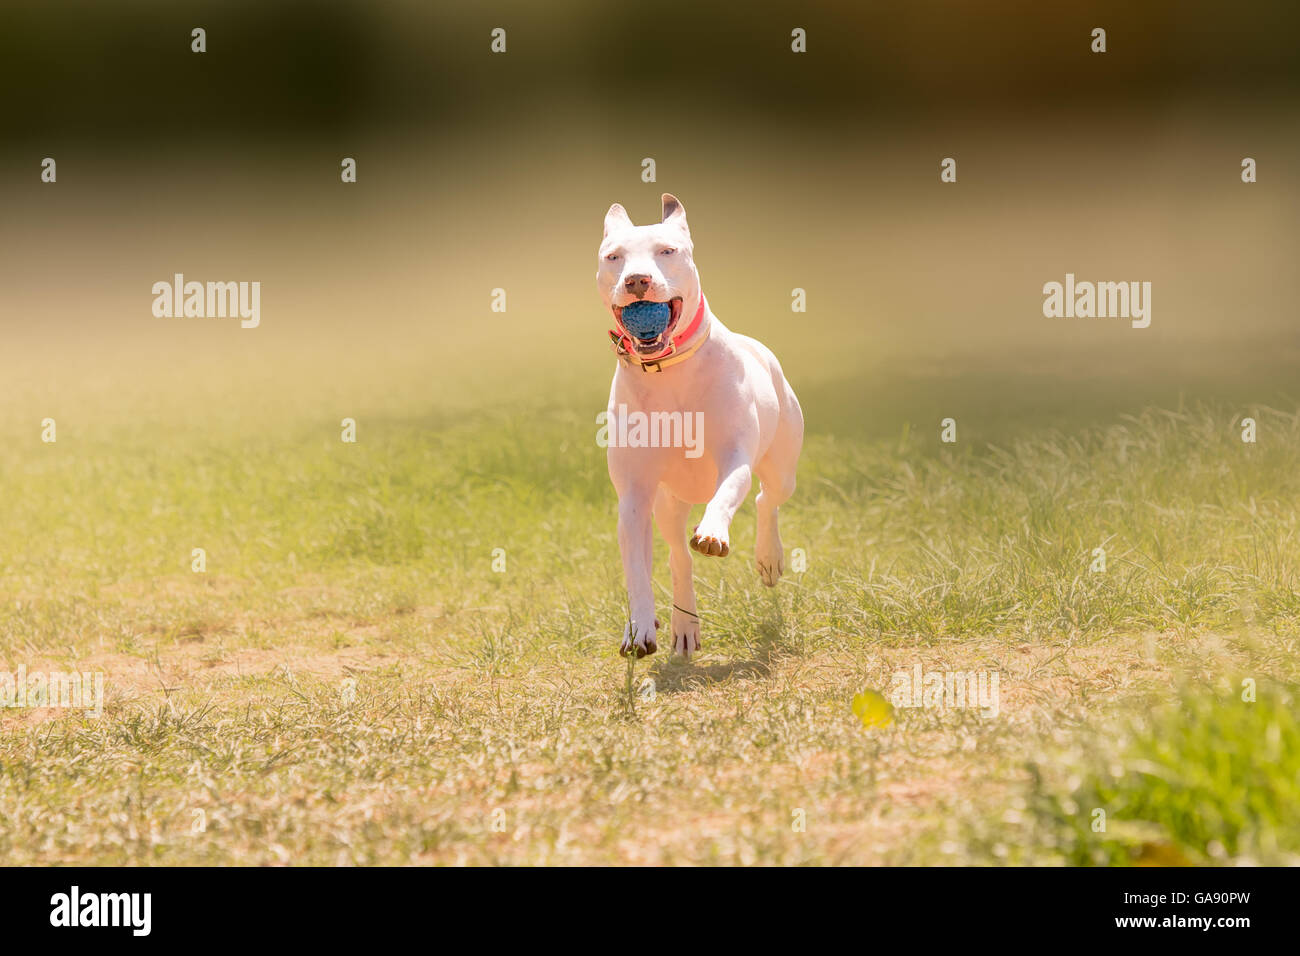 Happy American pit bull terrier dog running at a park. Stock Photo